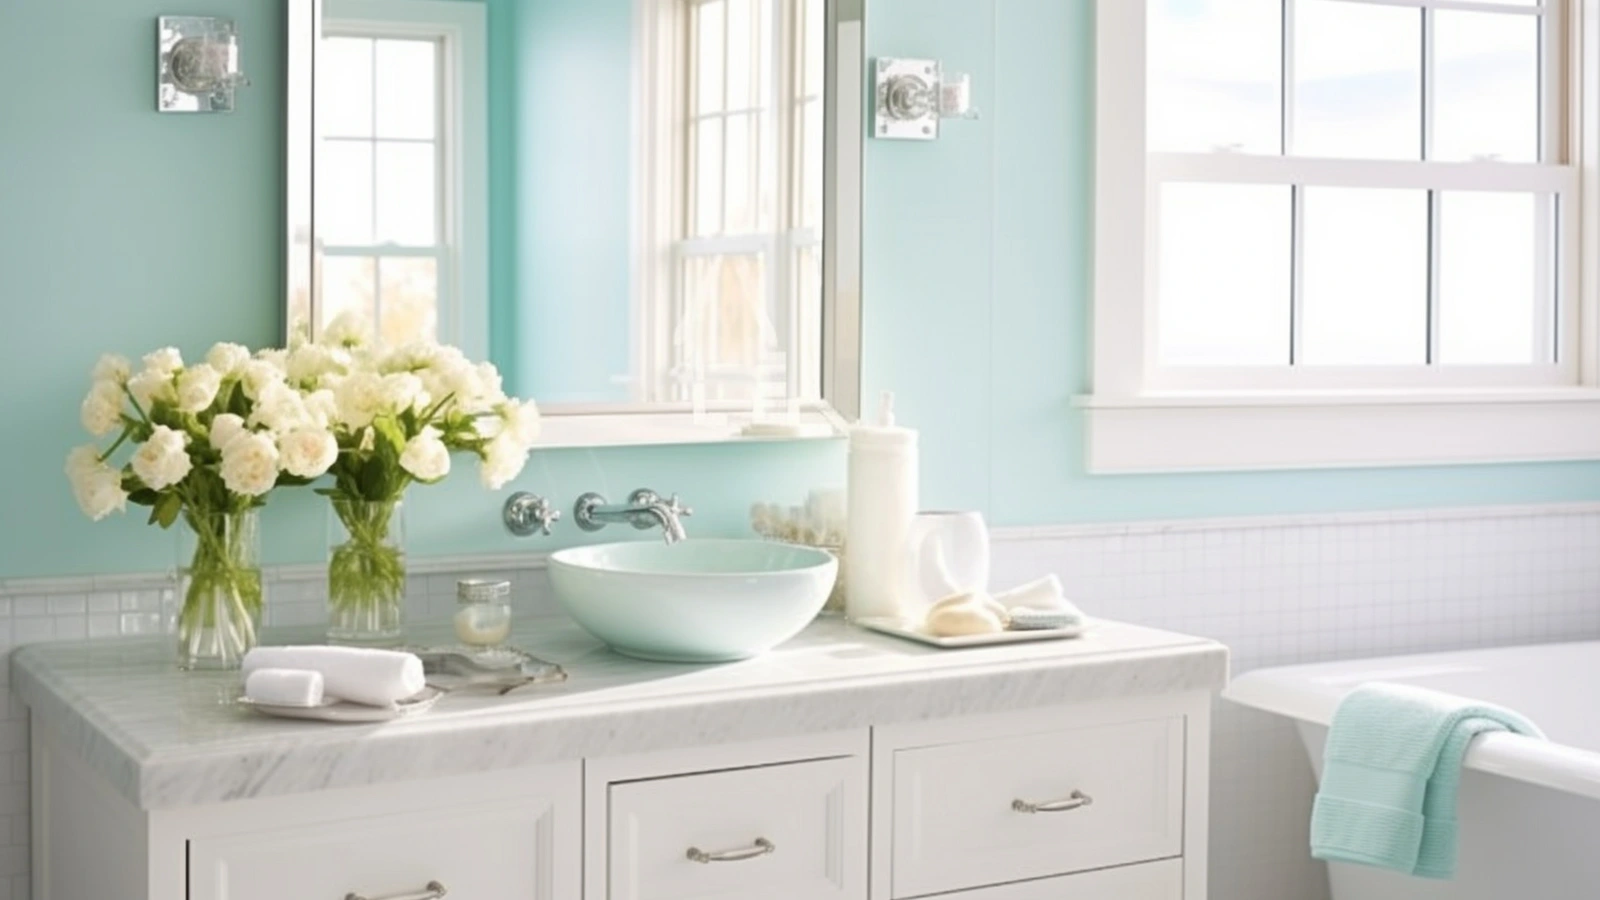 Small bathroom counter decorating ideas: a bathroom with blue and white walls and a white sink.